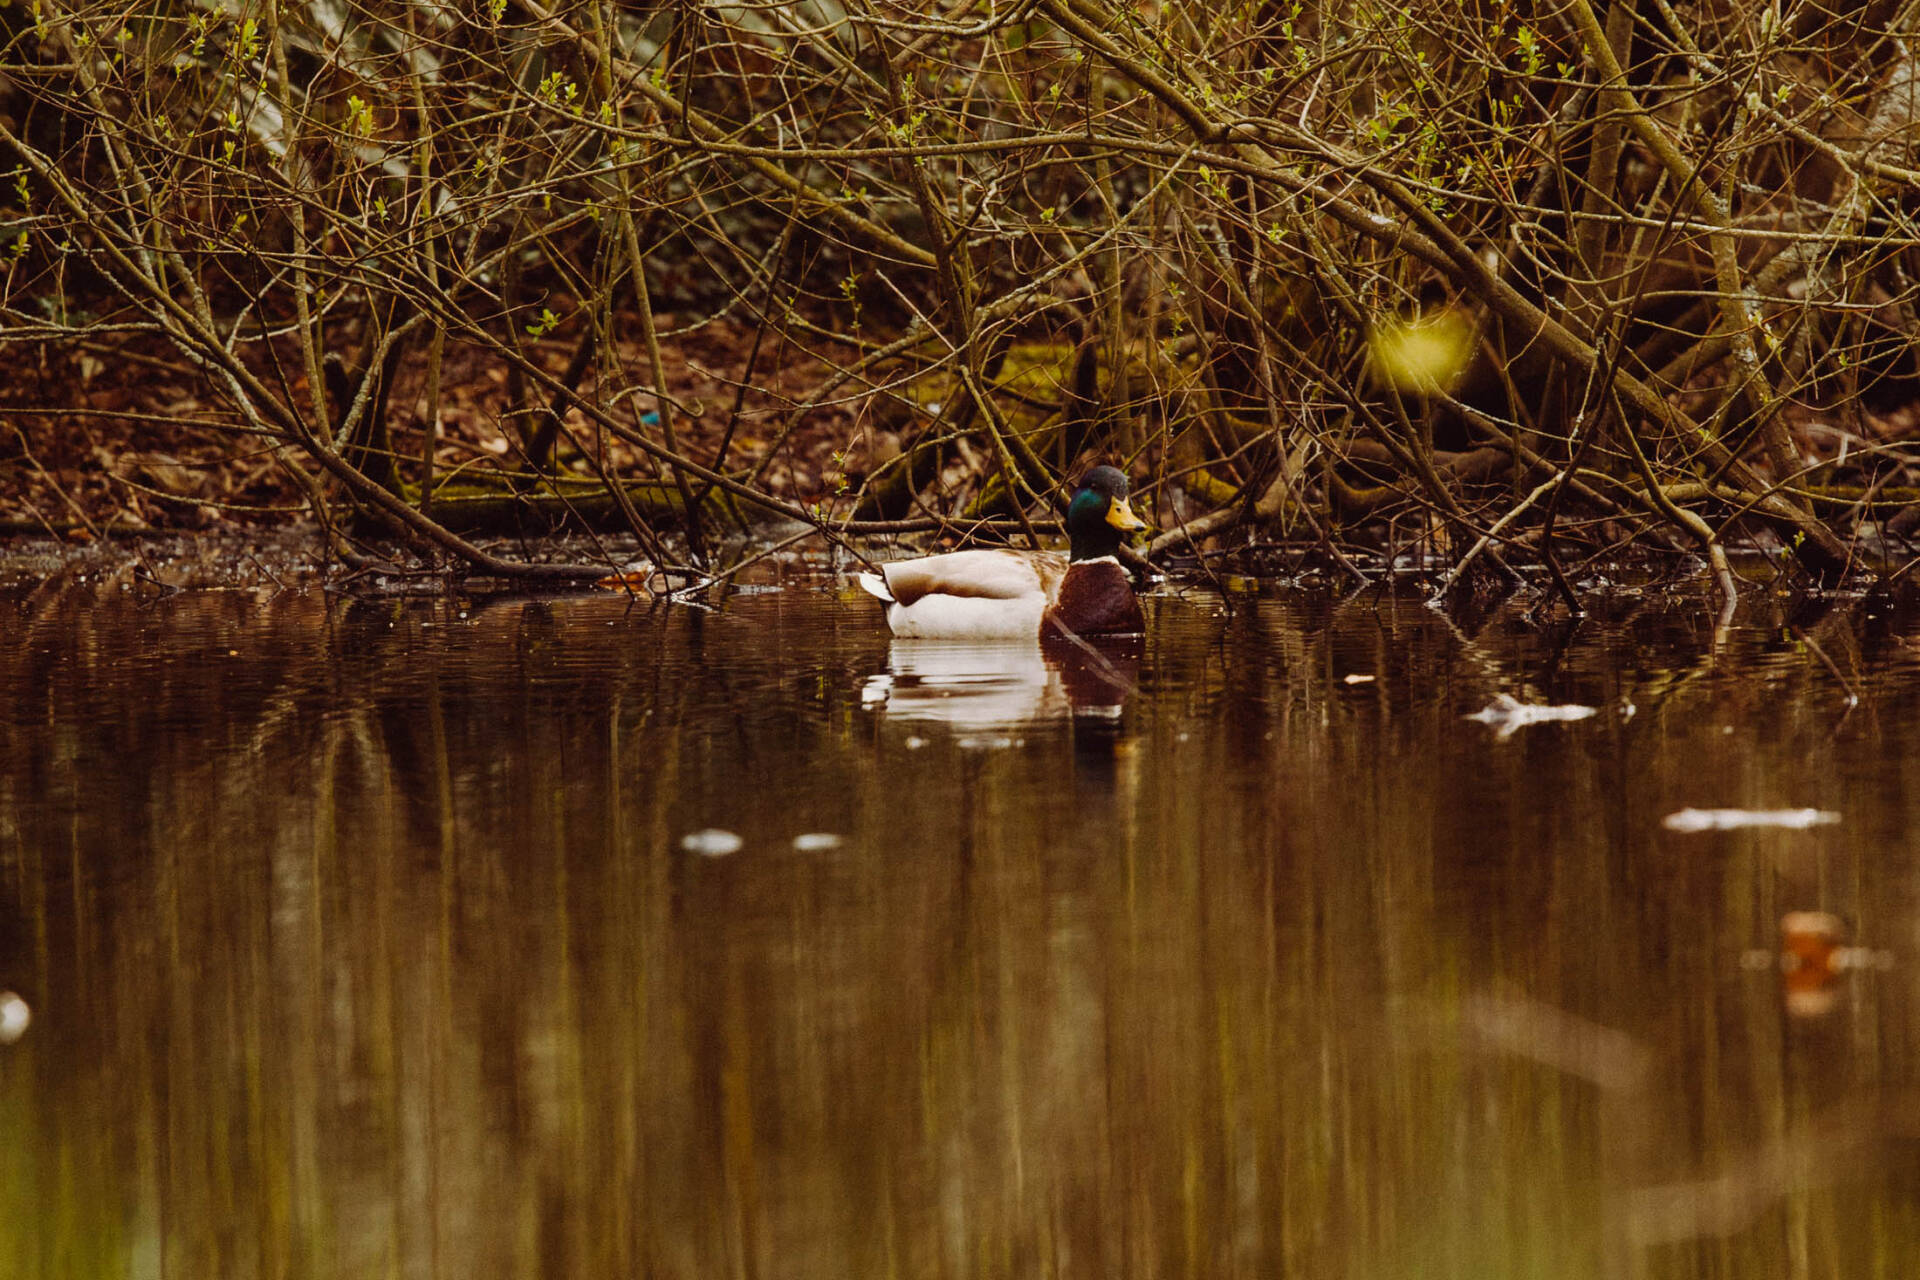 A Duck in the pond with trees surrounding it.